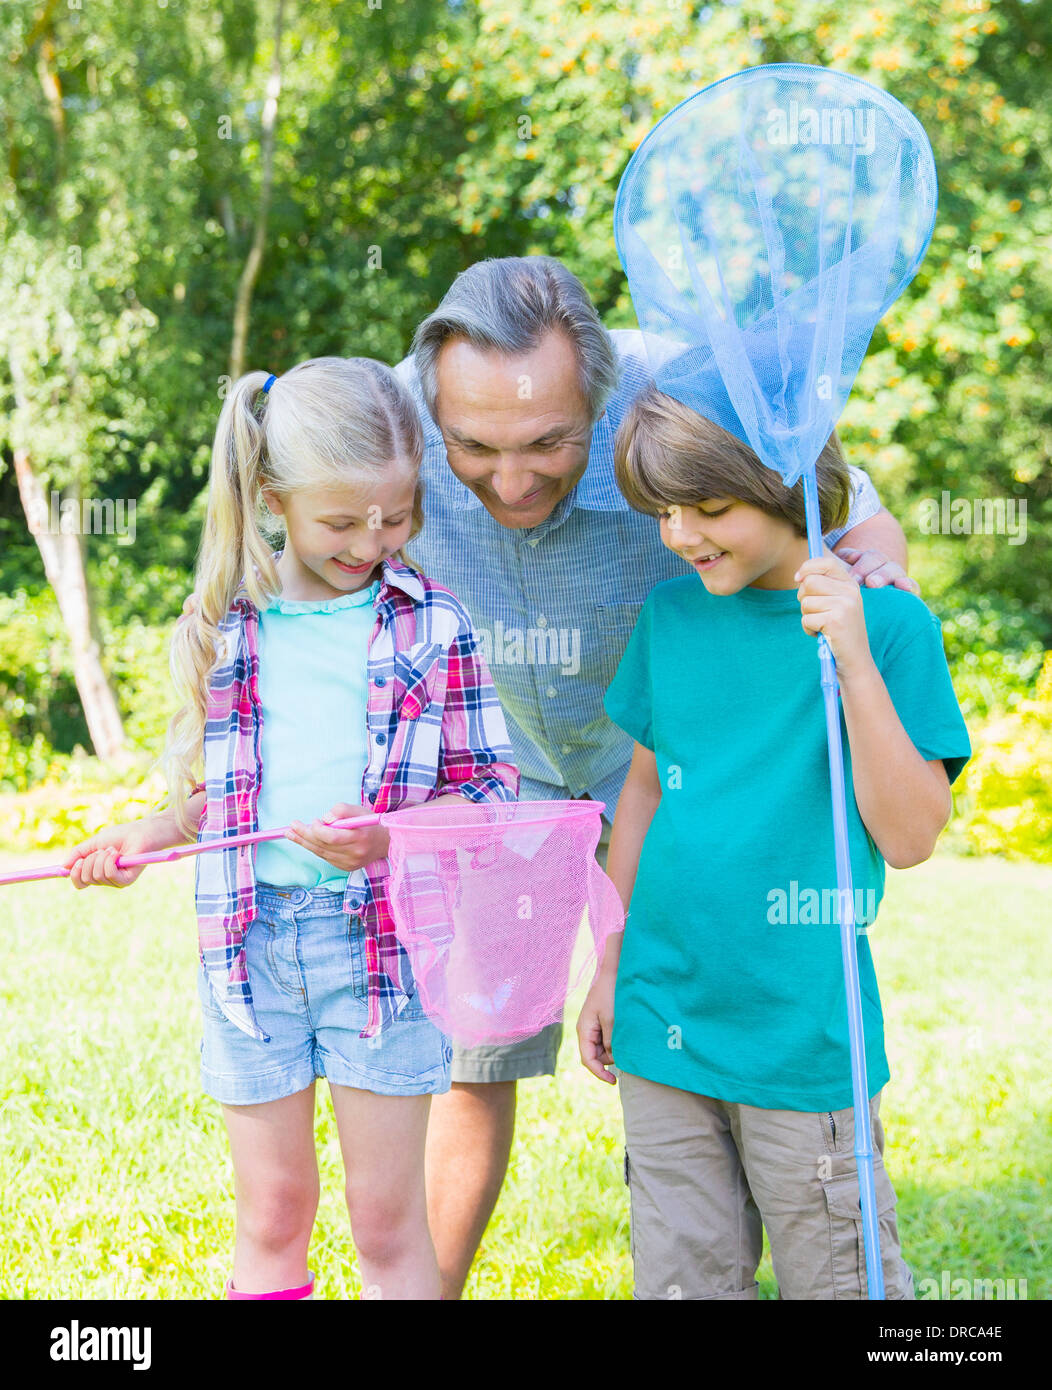 Grandfather and grandchildren looking at butterfly in net Stock Photo